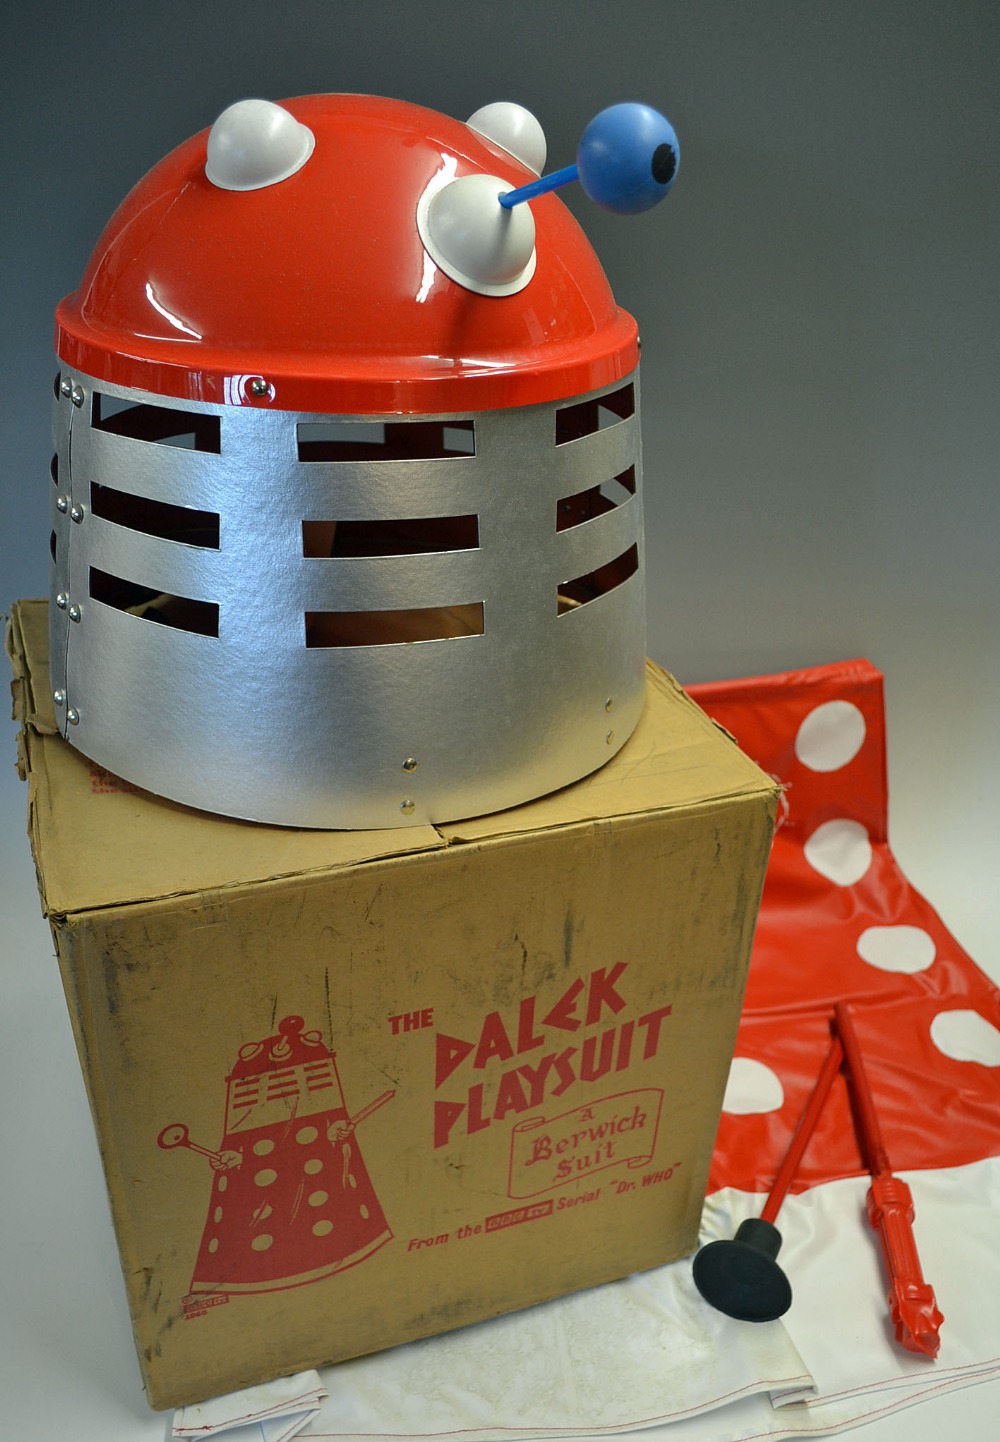 Berwick Dalek child's playsuit complete example with original attachments, housed in original box - Image 2 of 2